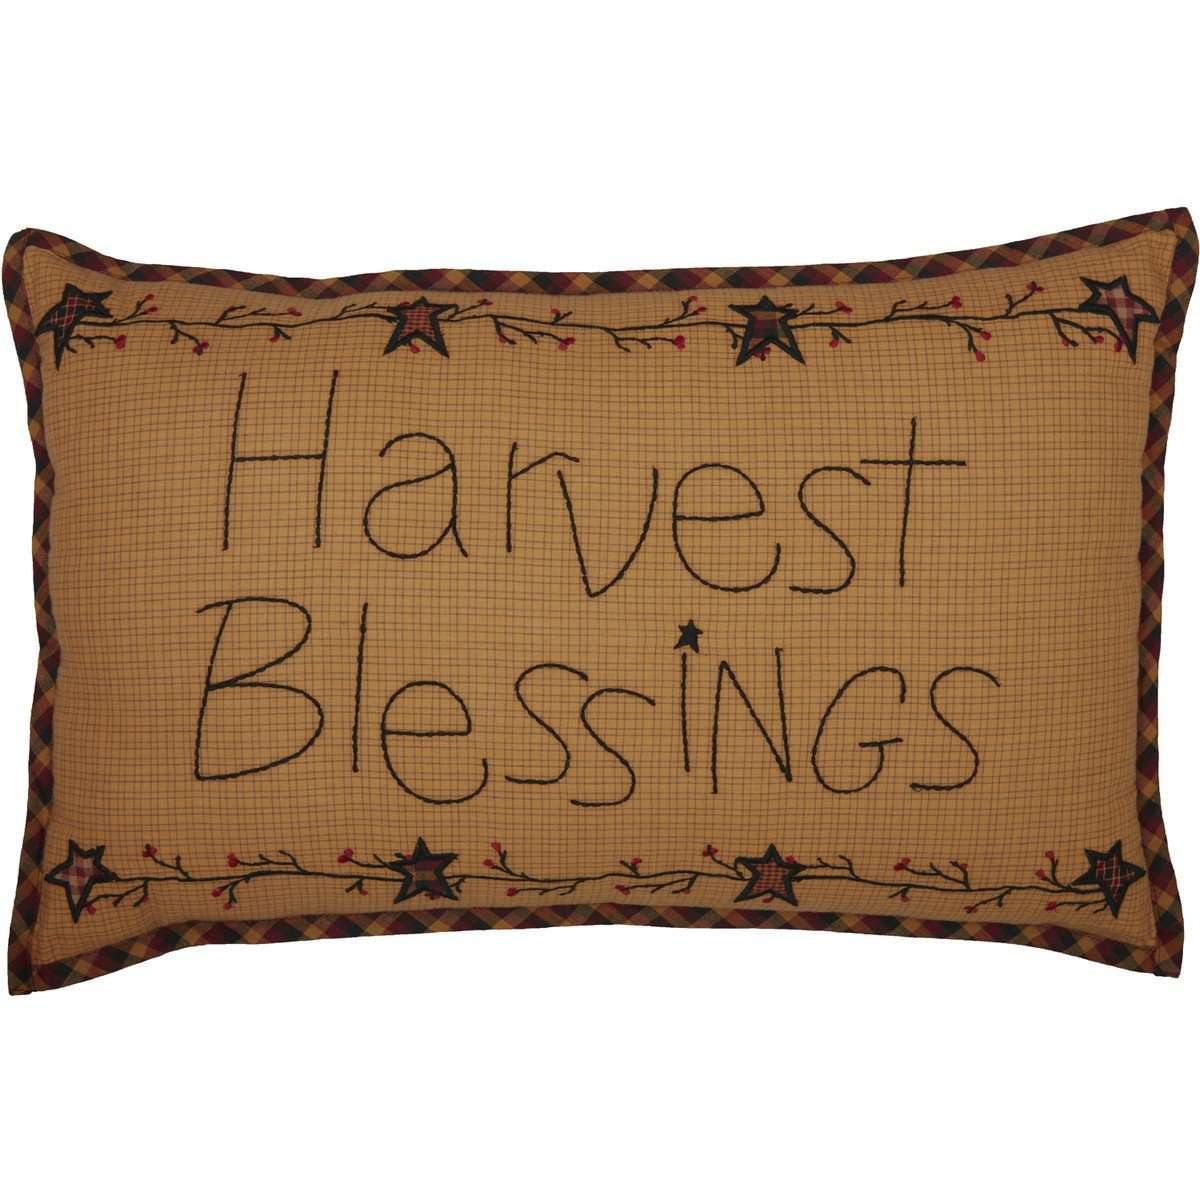 HERITAGE FARMS HARVEST BLESSINGS PILLOW 14X22 front